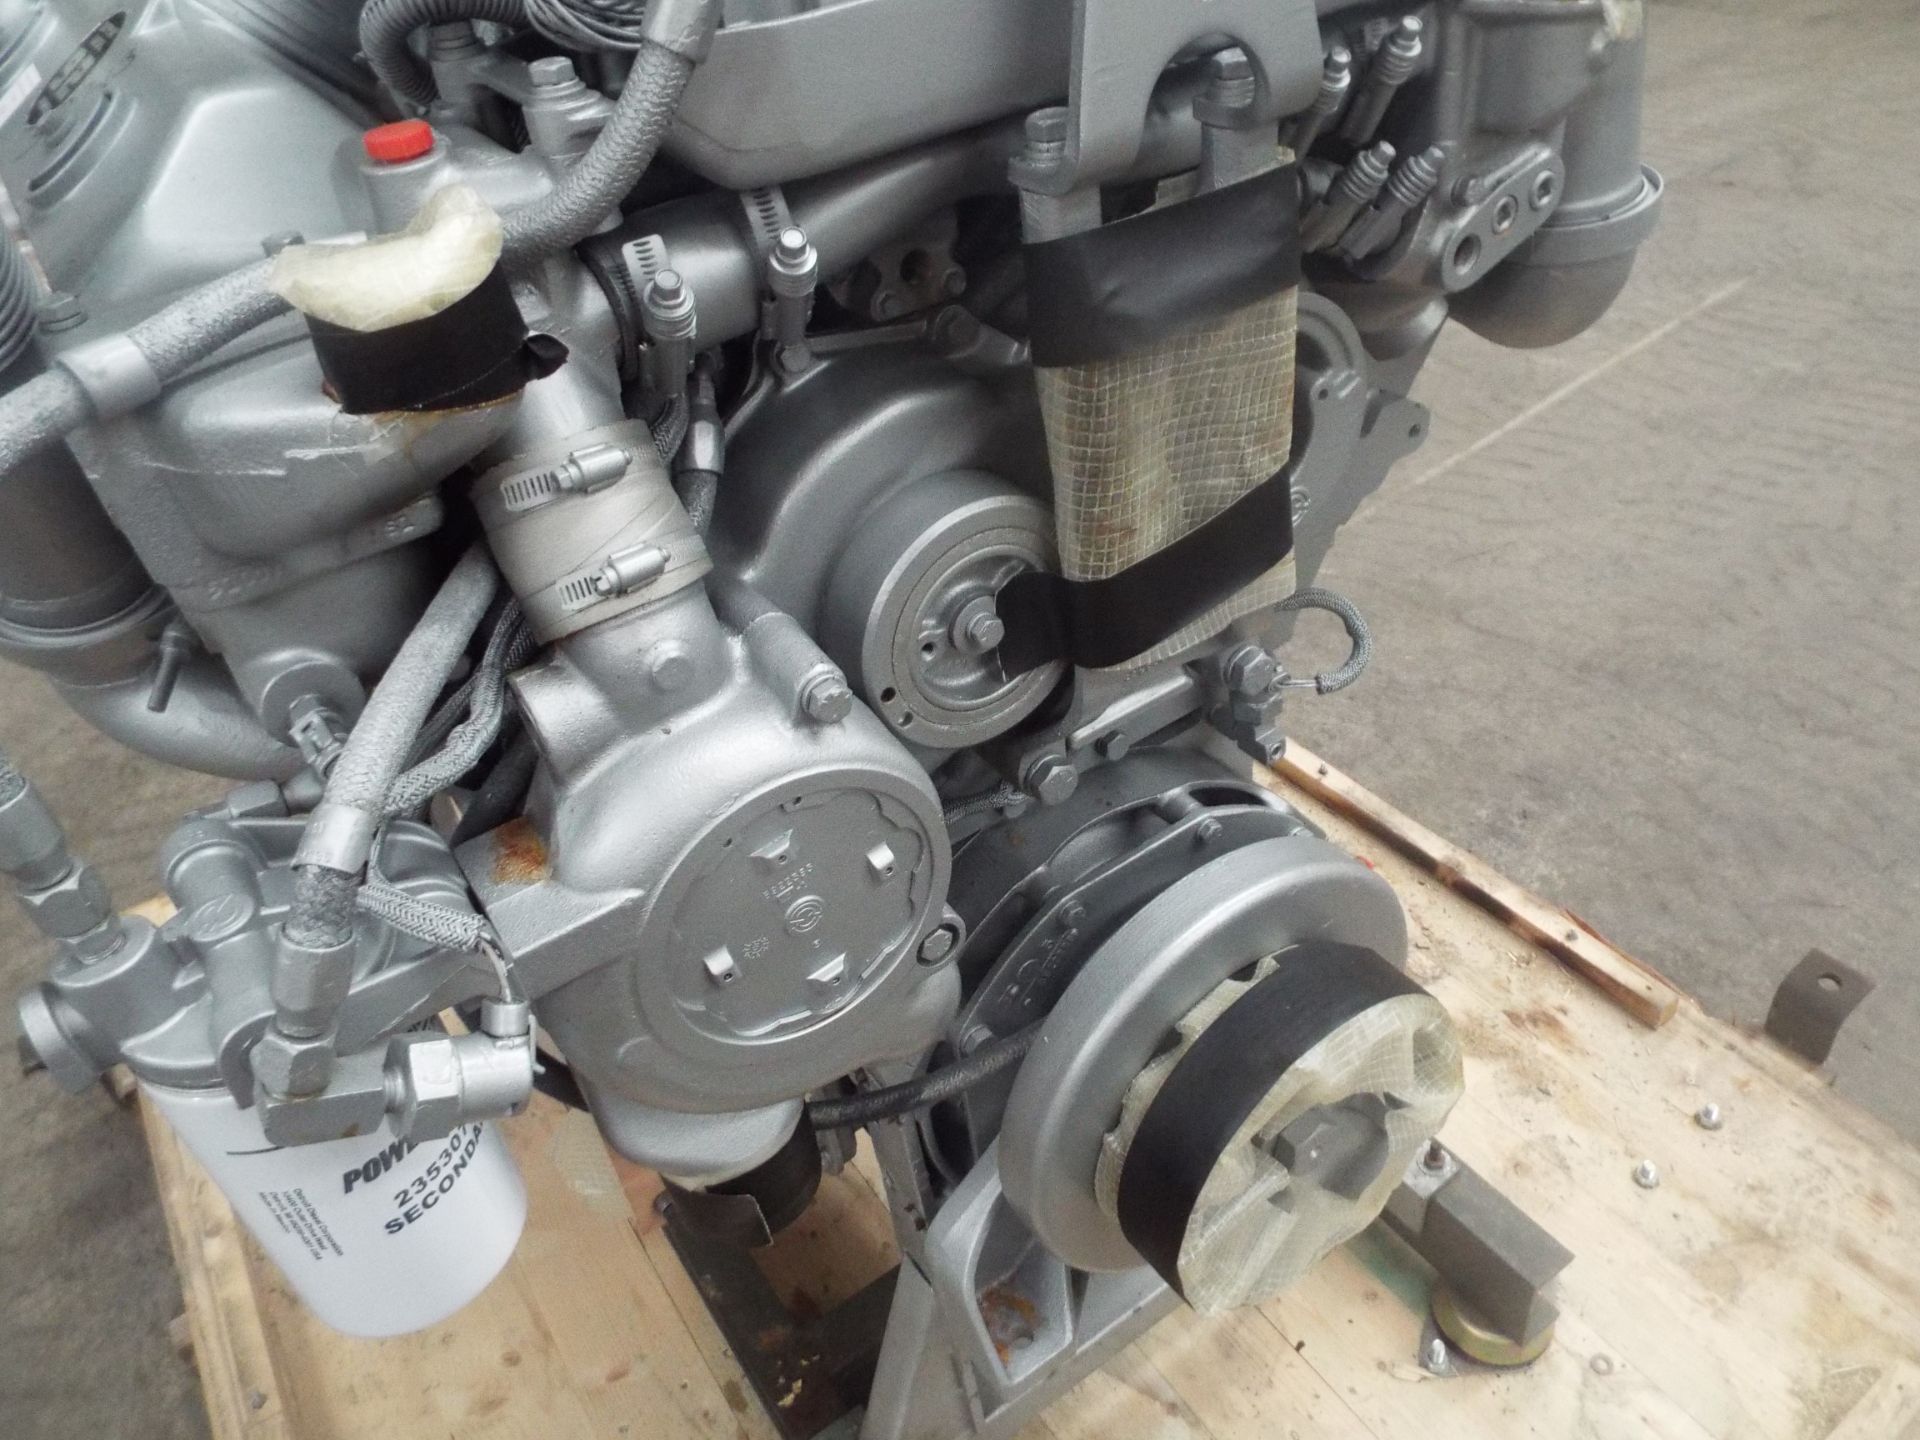 Detroit 8V-92TA DDEC V8 Turbo Diesel Engine Complete with Ancillaries and Starter Motor - Image 6 of 20